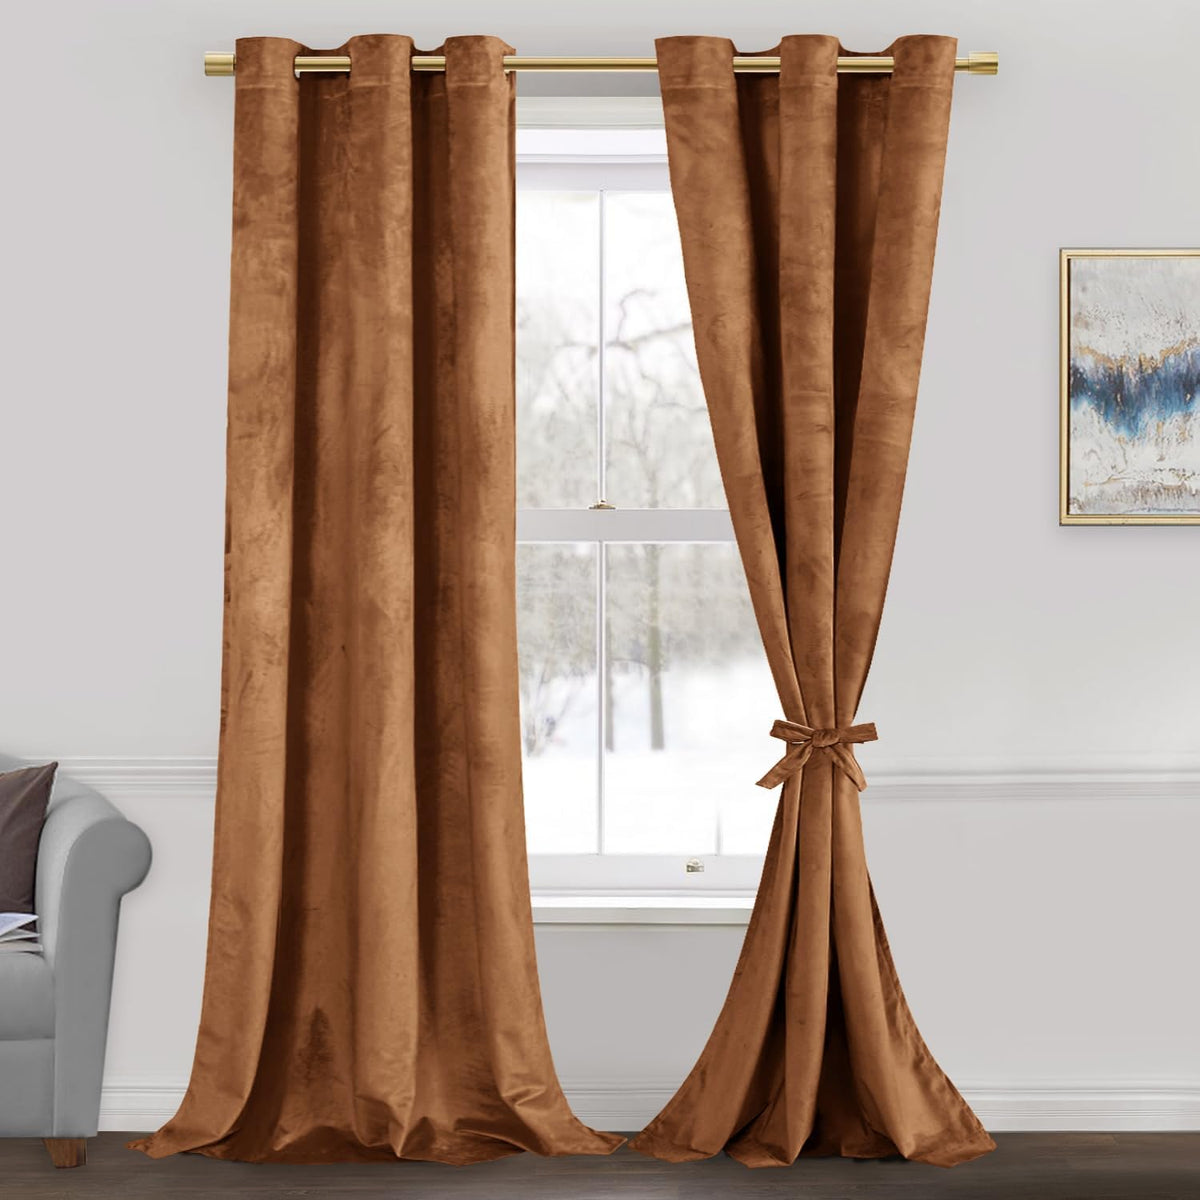 Polish Brown Luxury Laser Work Curtains With Velvet Fabrics Each Panel Size 52×90 Inches